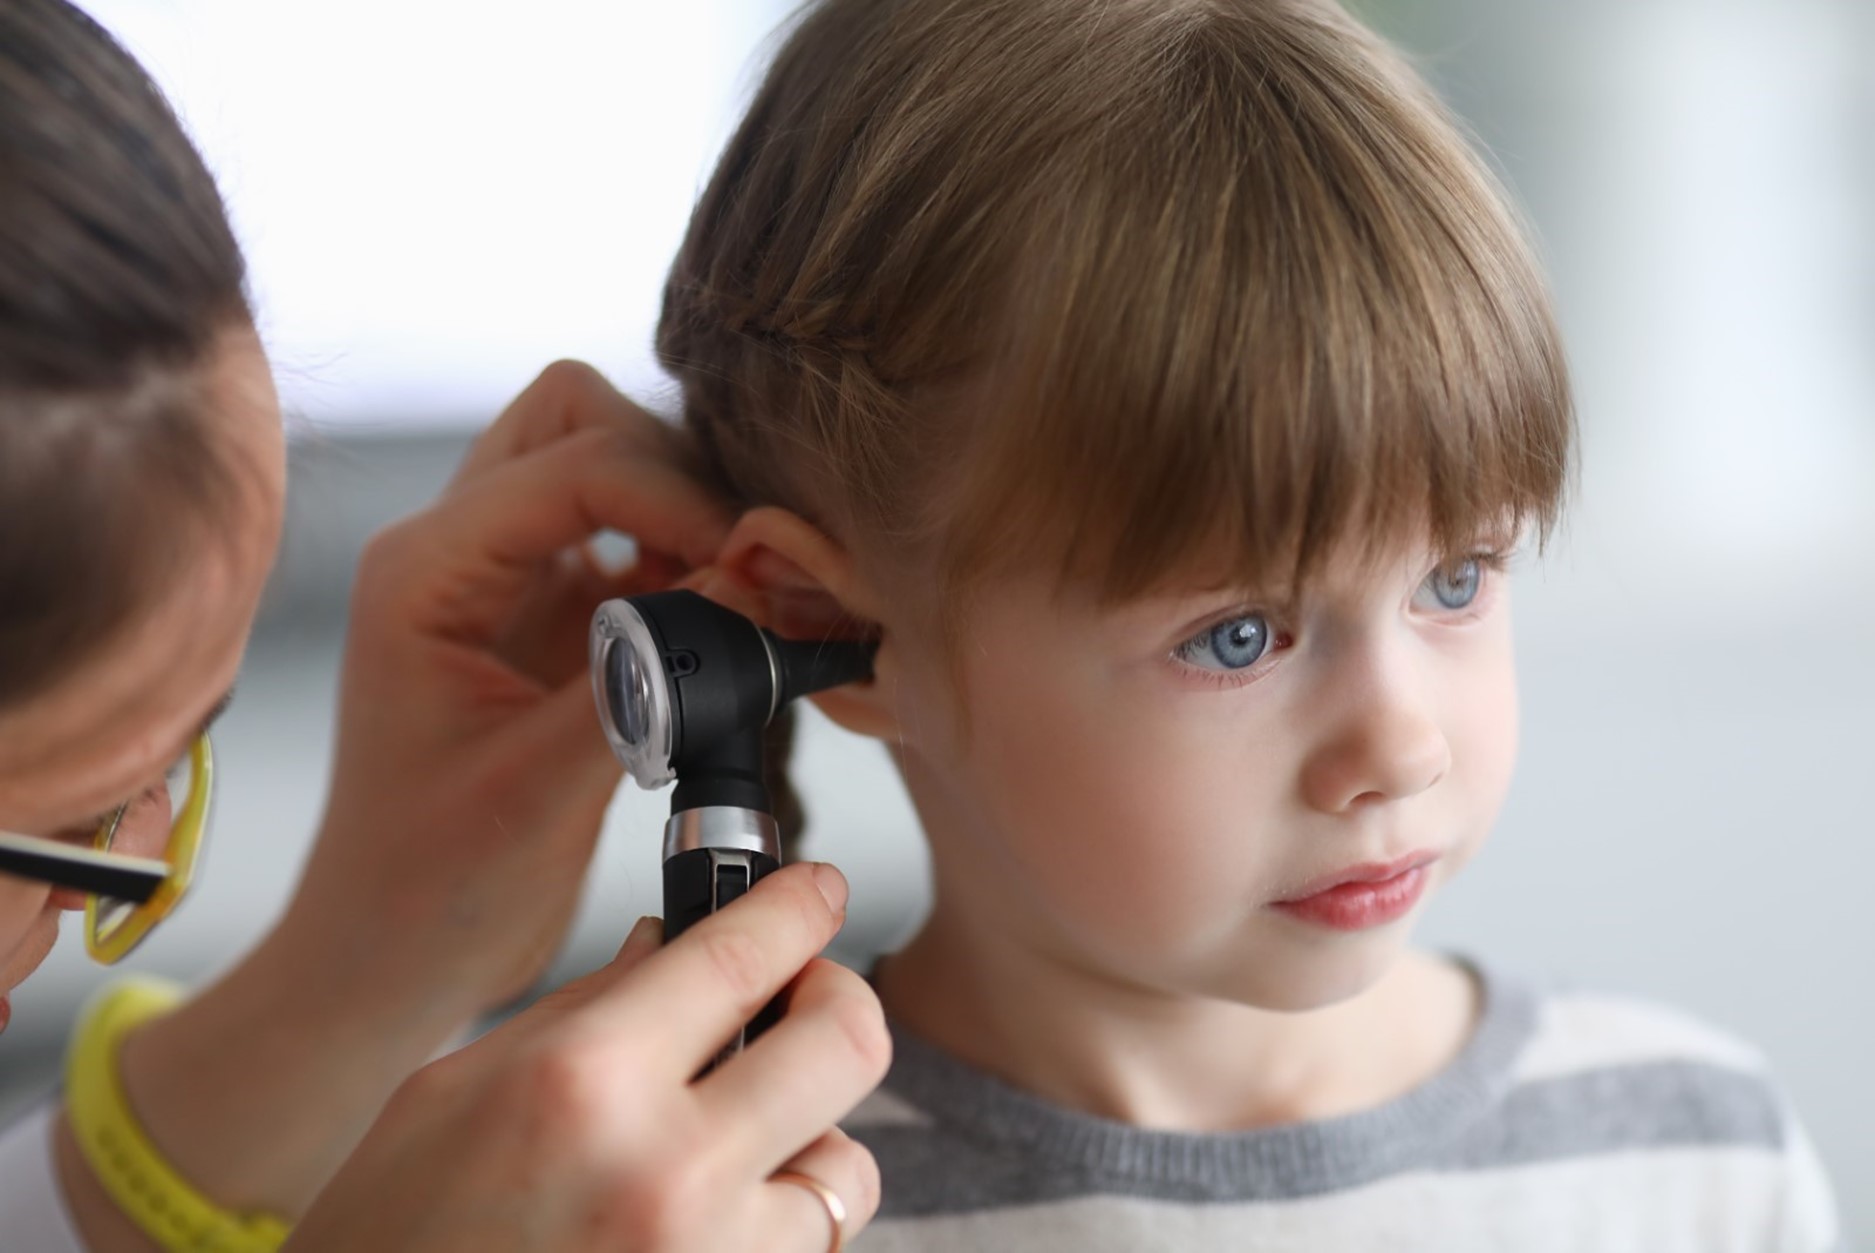 Does My Child Have an Ear Infection?